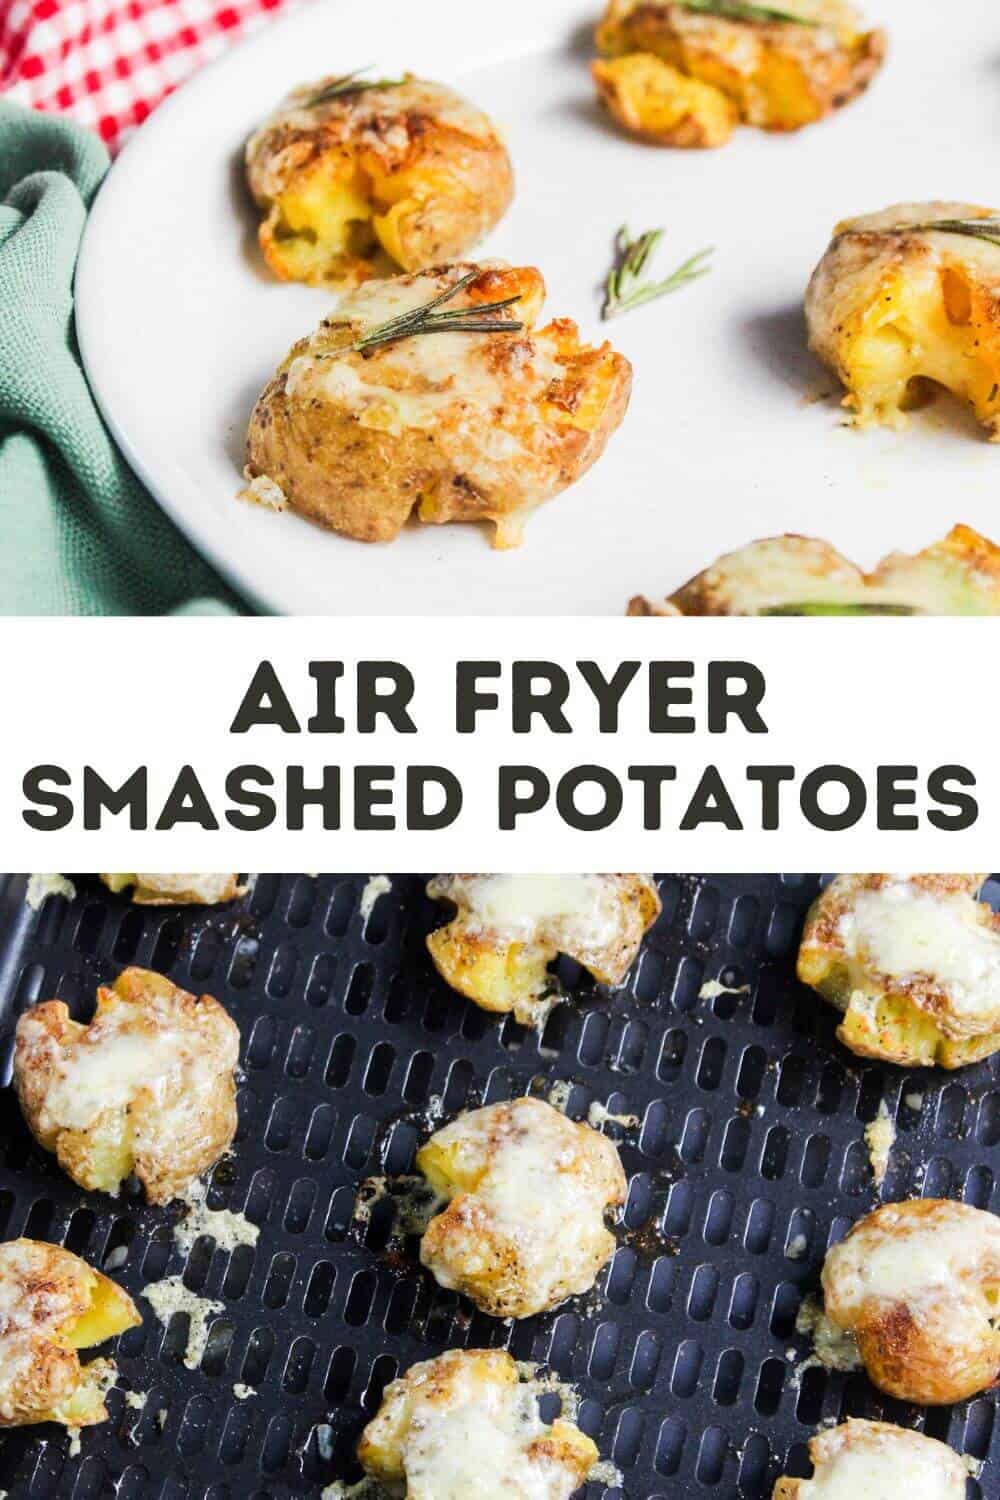 Air fryer smashed potatoes.